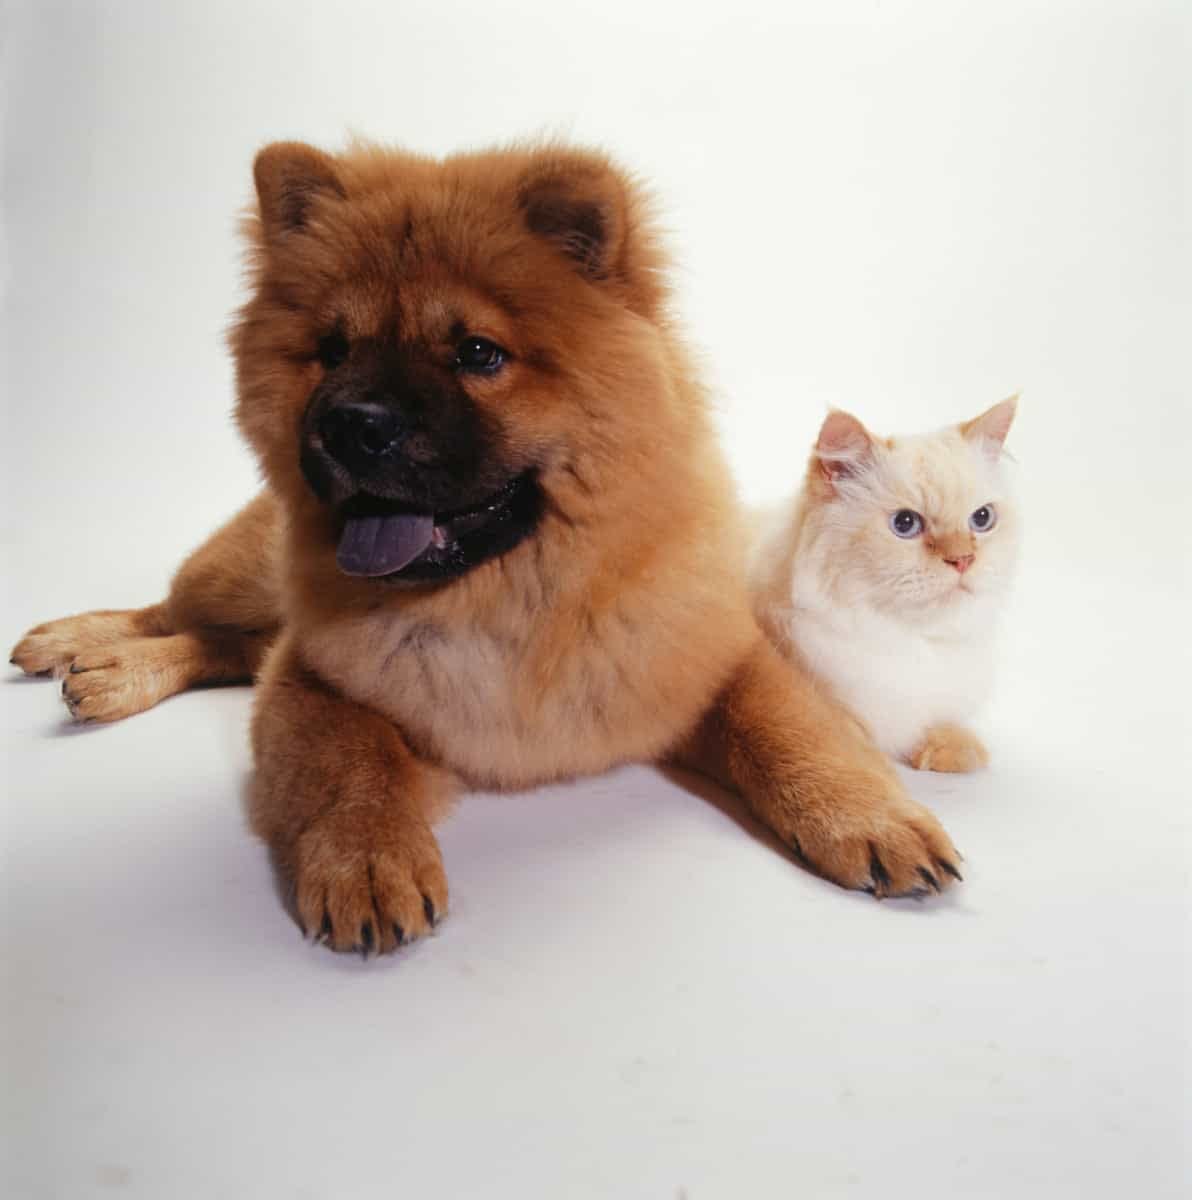 do chow chows get along with cats